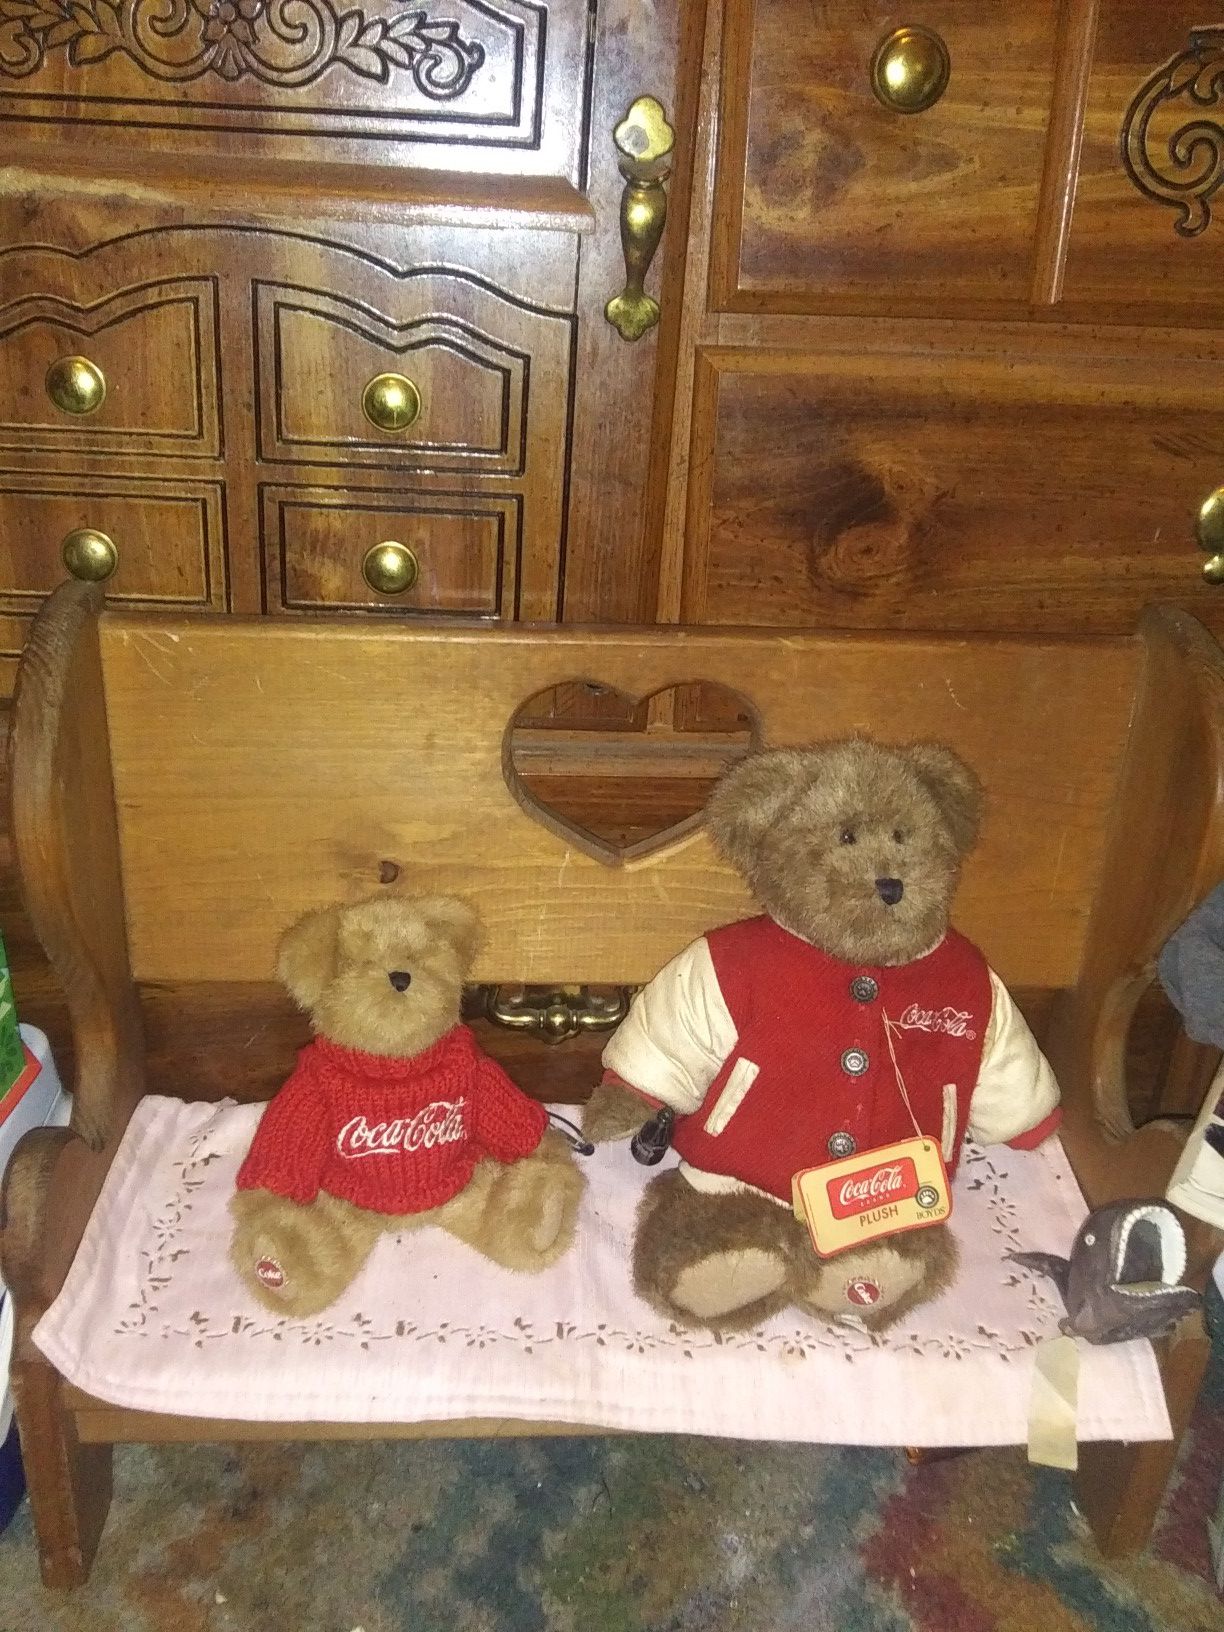 Coke Cole bears and beanch